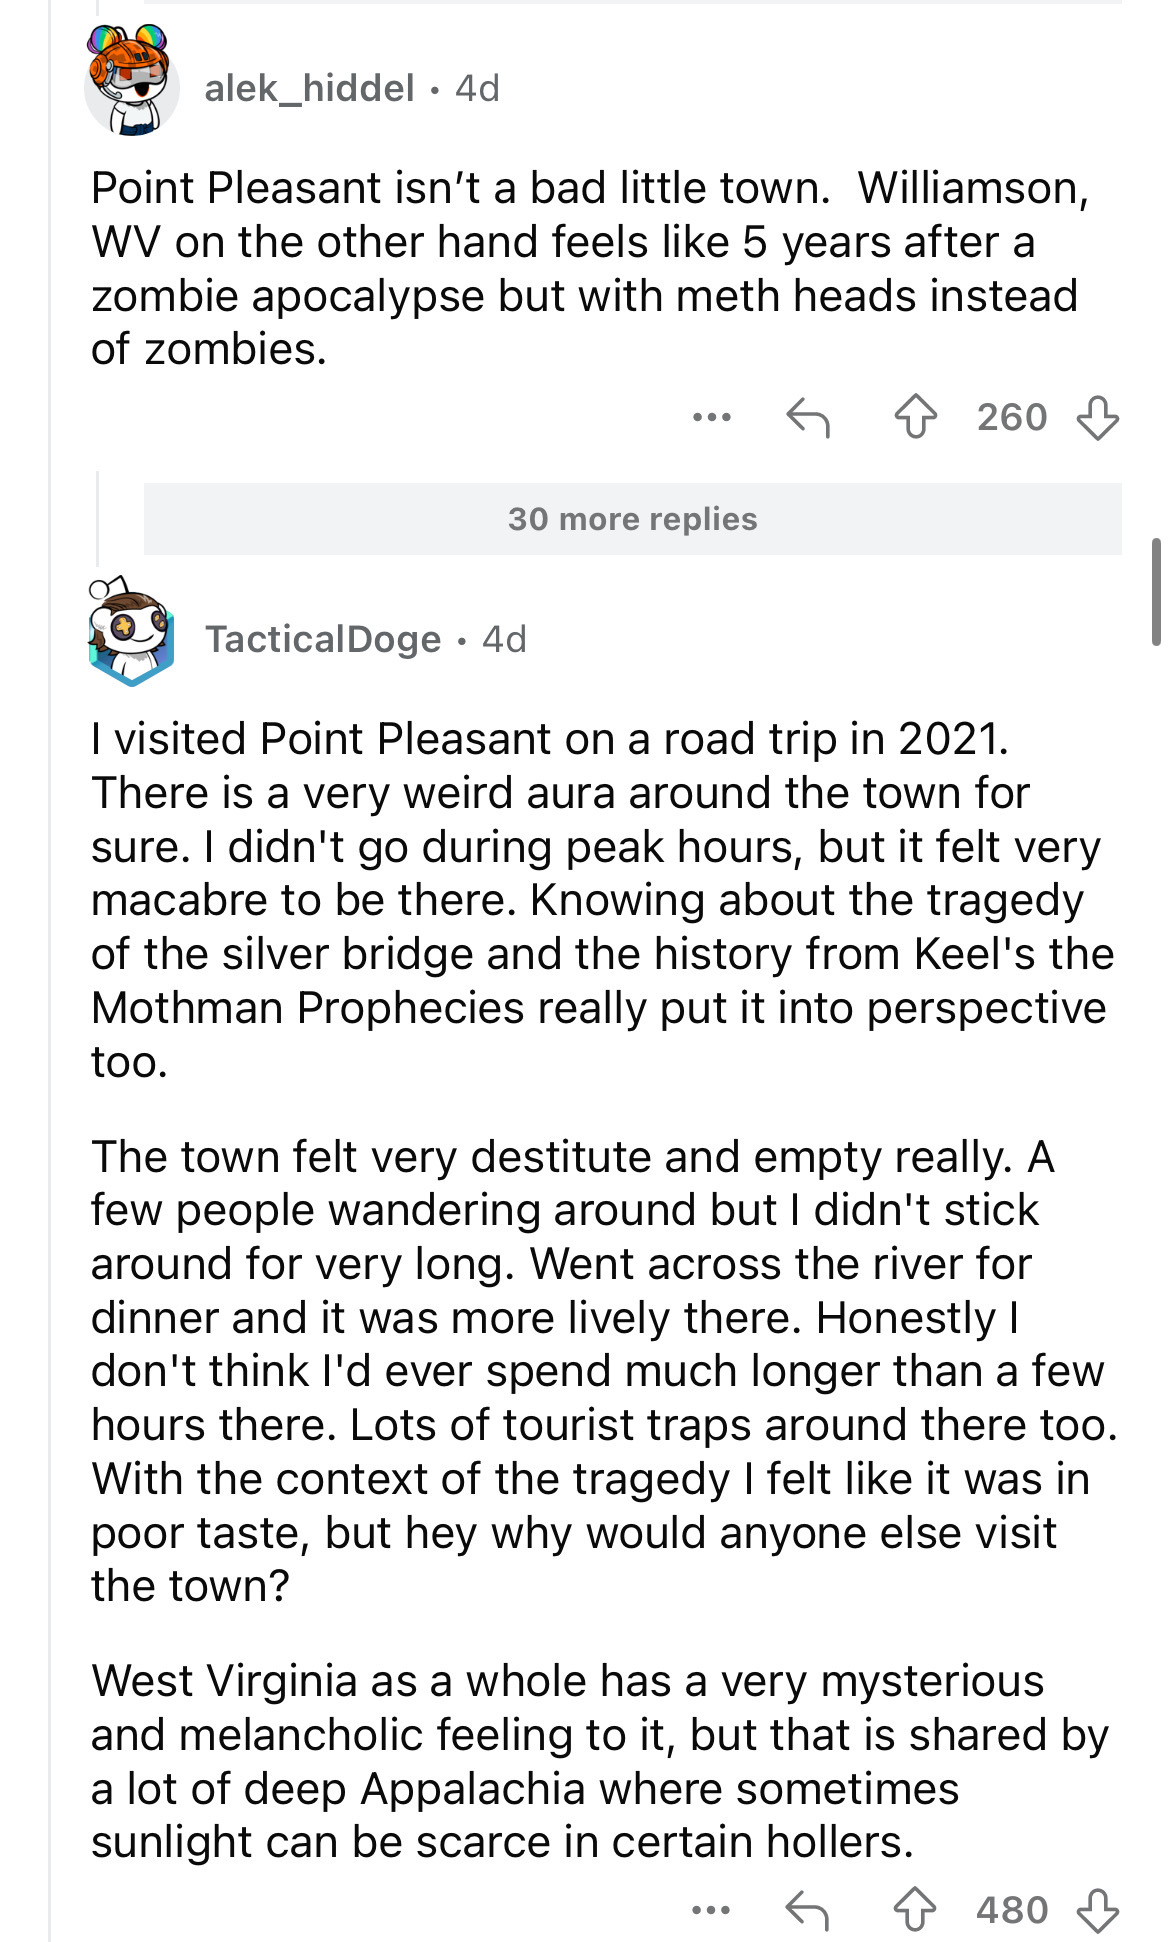 document - alek_hiddel. 4d Point Pleasant isn't a bad little town. Williamson, Wv on the other hand feels 5 years after a zombie apocalypse but with meth heads instead of zombies. 260 TacticalDoge 4d 30 more replies I visited Point Pleasant on a road trip